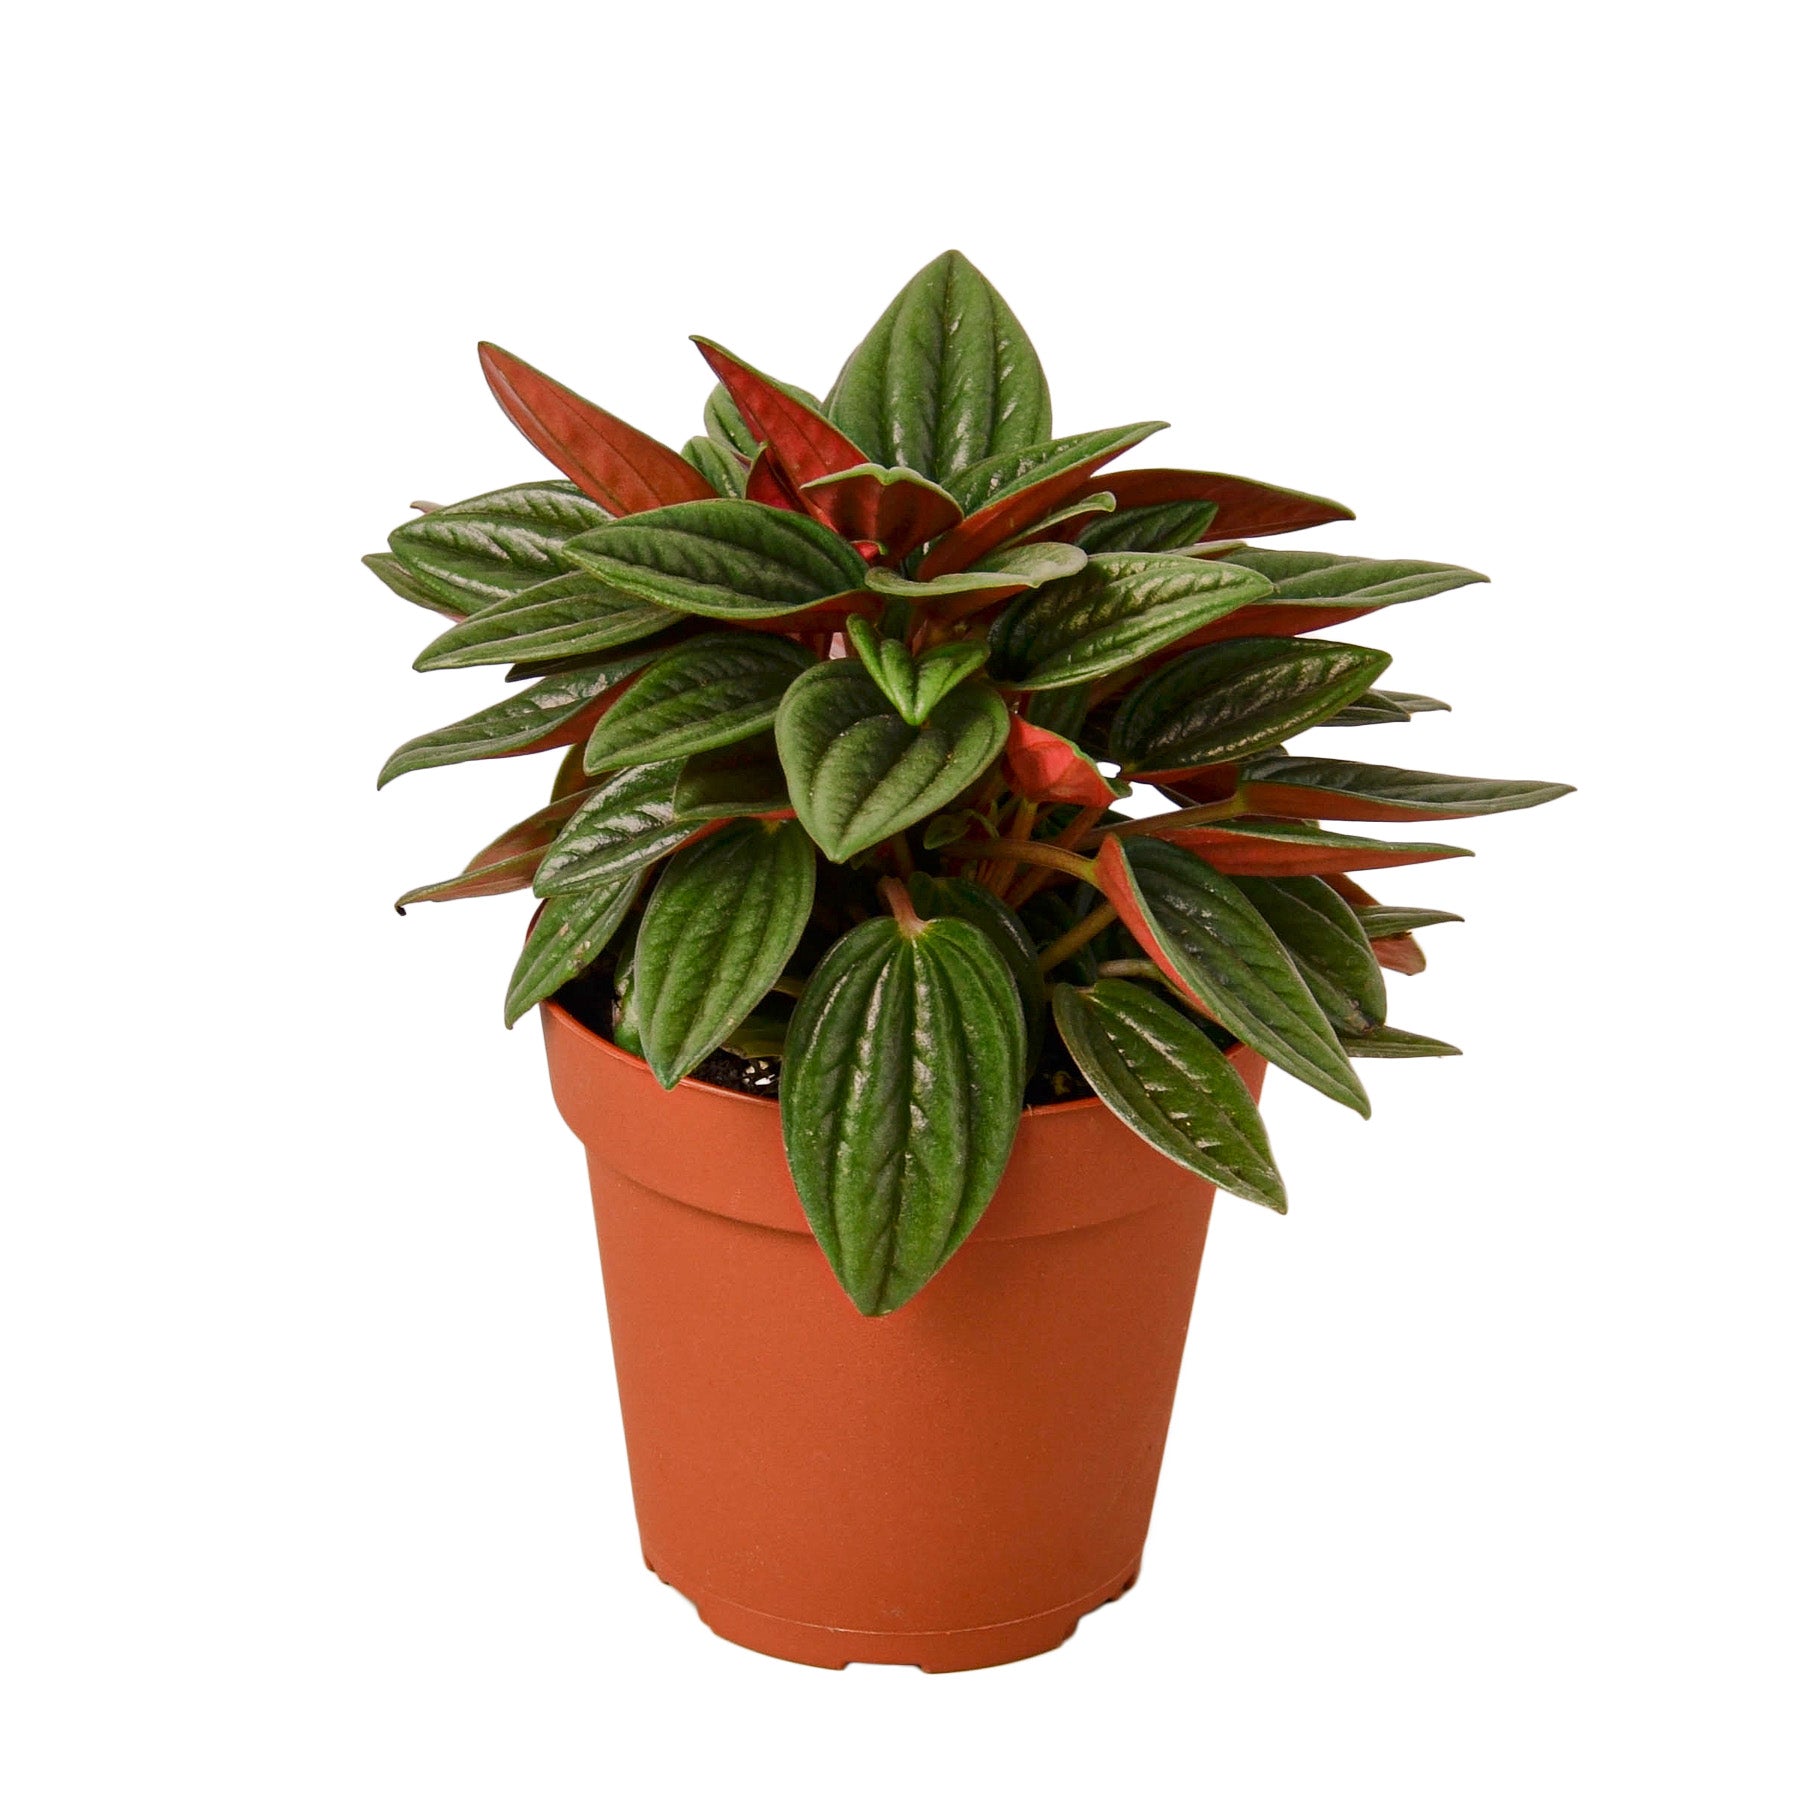 A red plant in a pot on a white background at the best garden center near me.